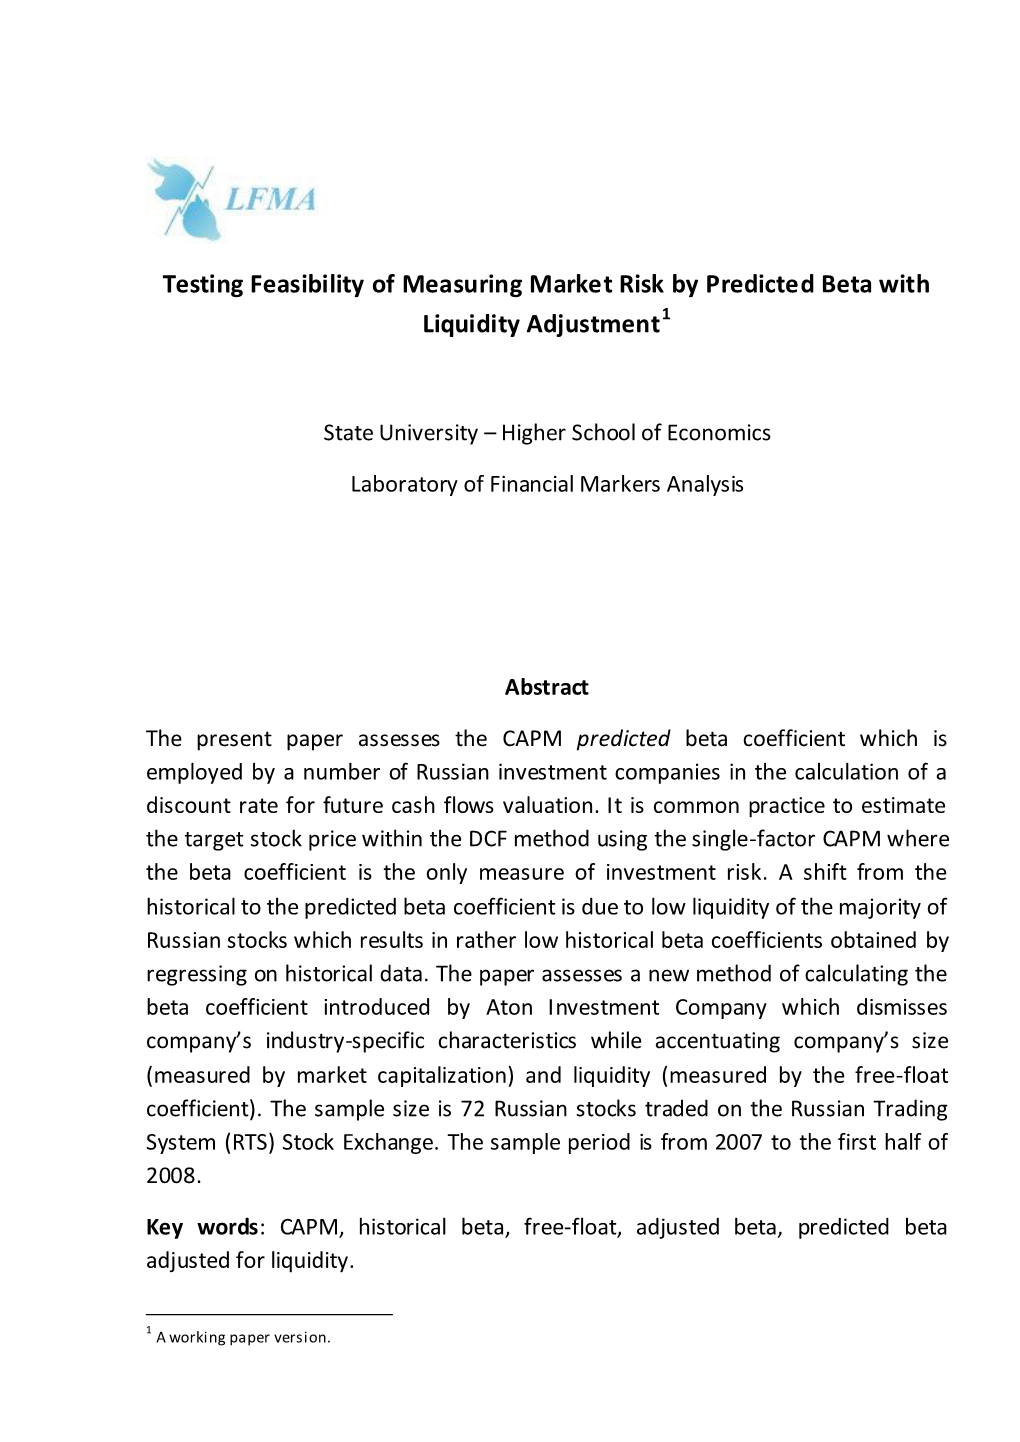 Testing Feasibility of Measuring Market Risk by Predicted Beta with Liquidity Adjustment1